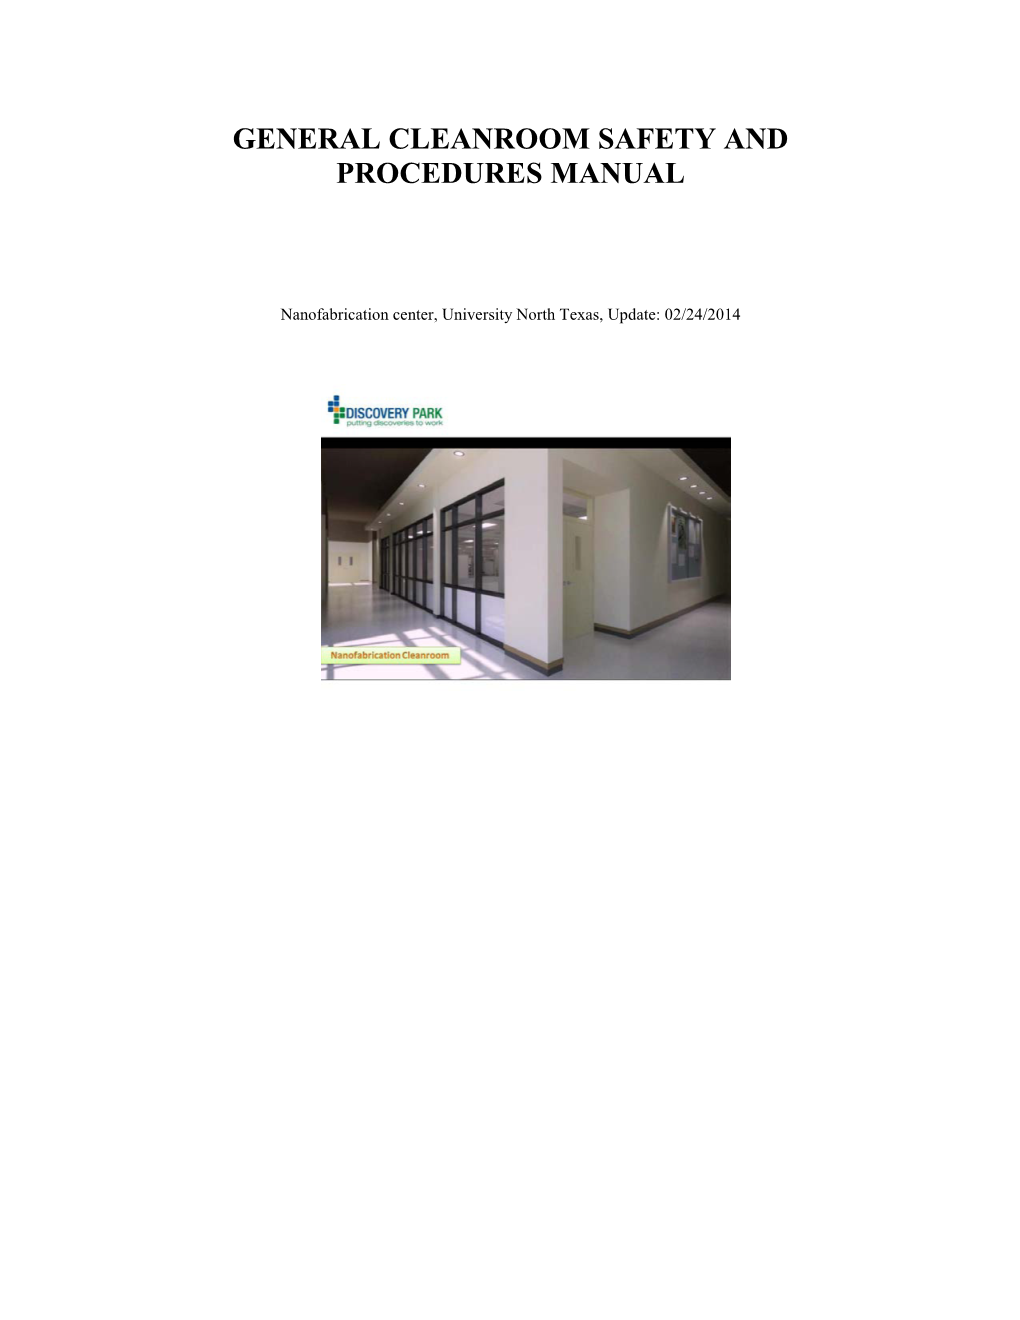 General Cleanroom Safety and Procedures Manual